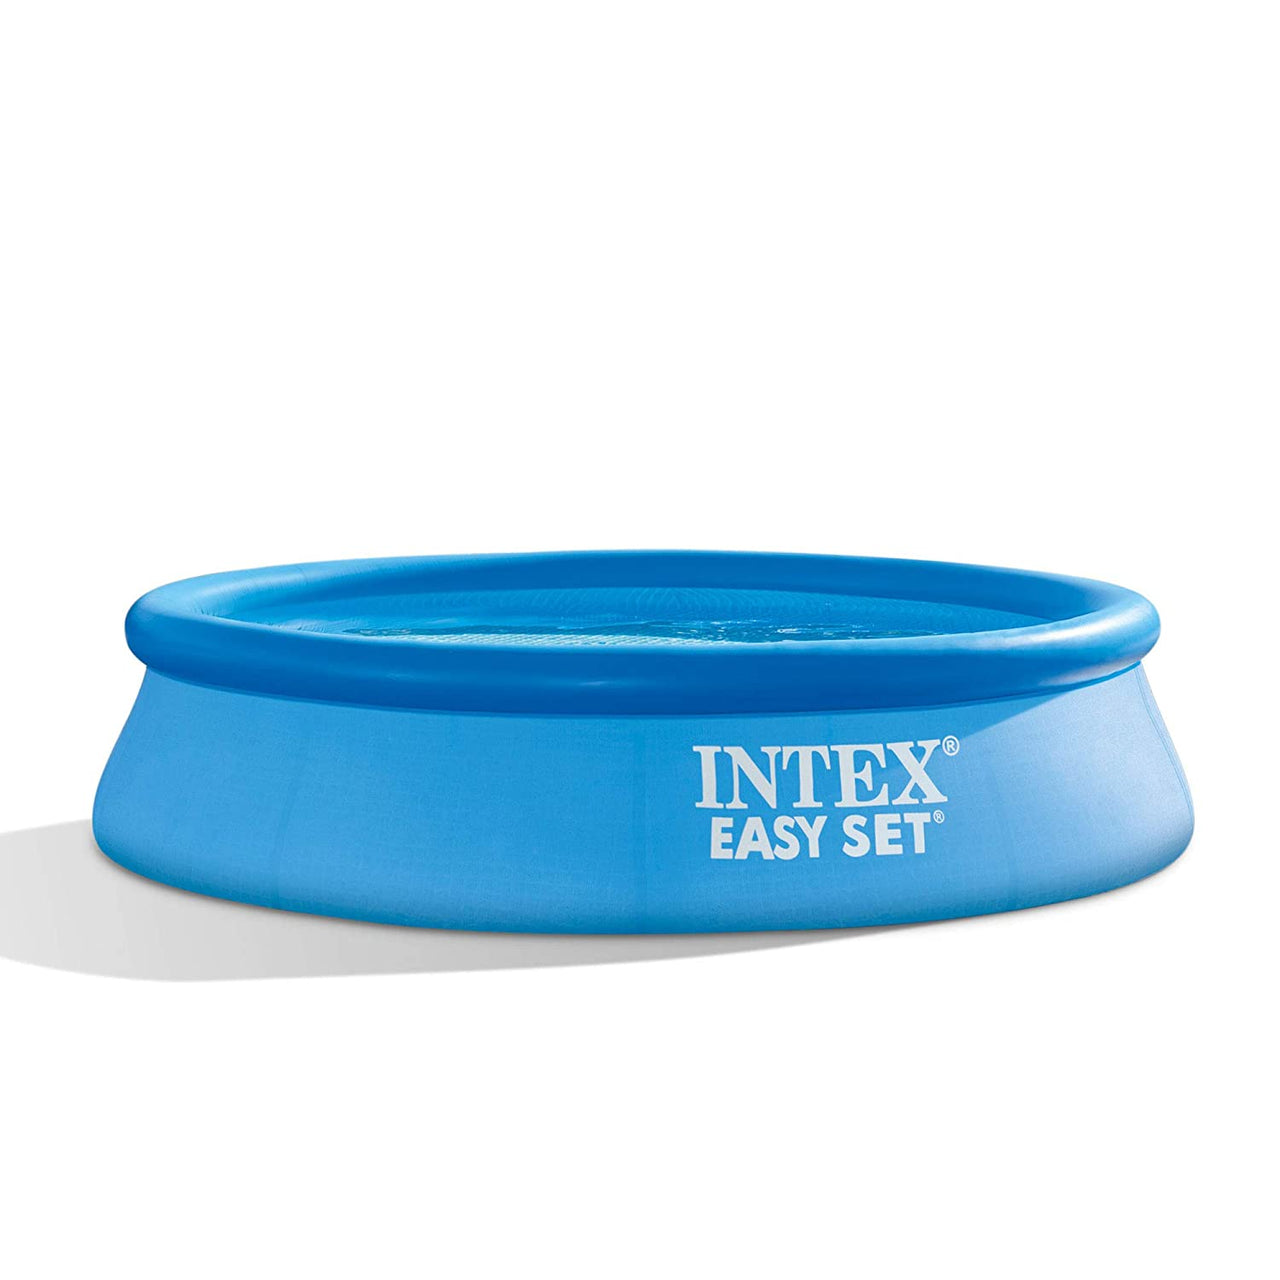 Intex Puncture Resistant Family Pool 8ft x 24in